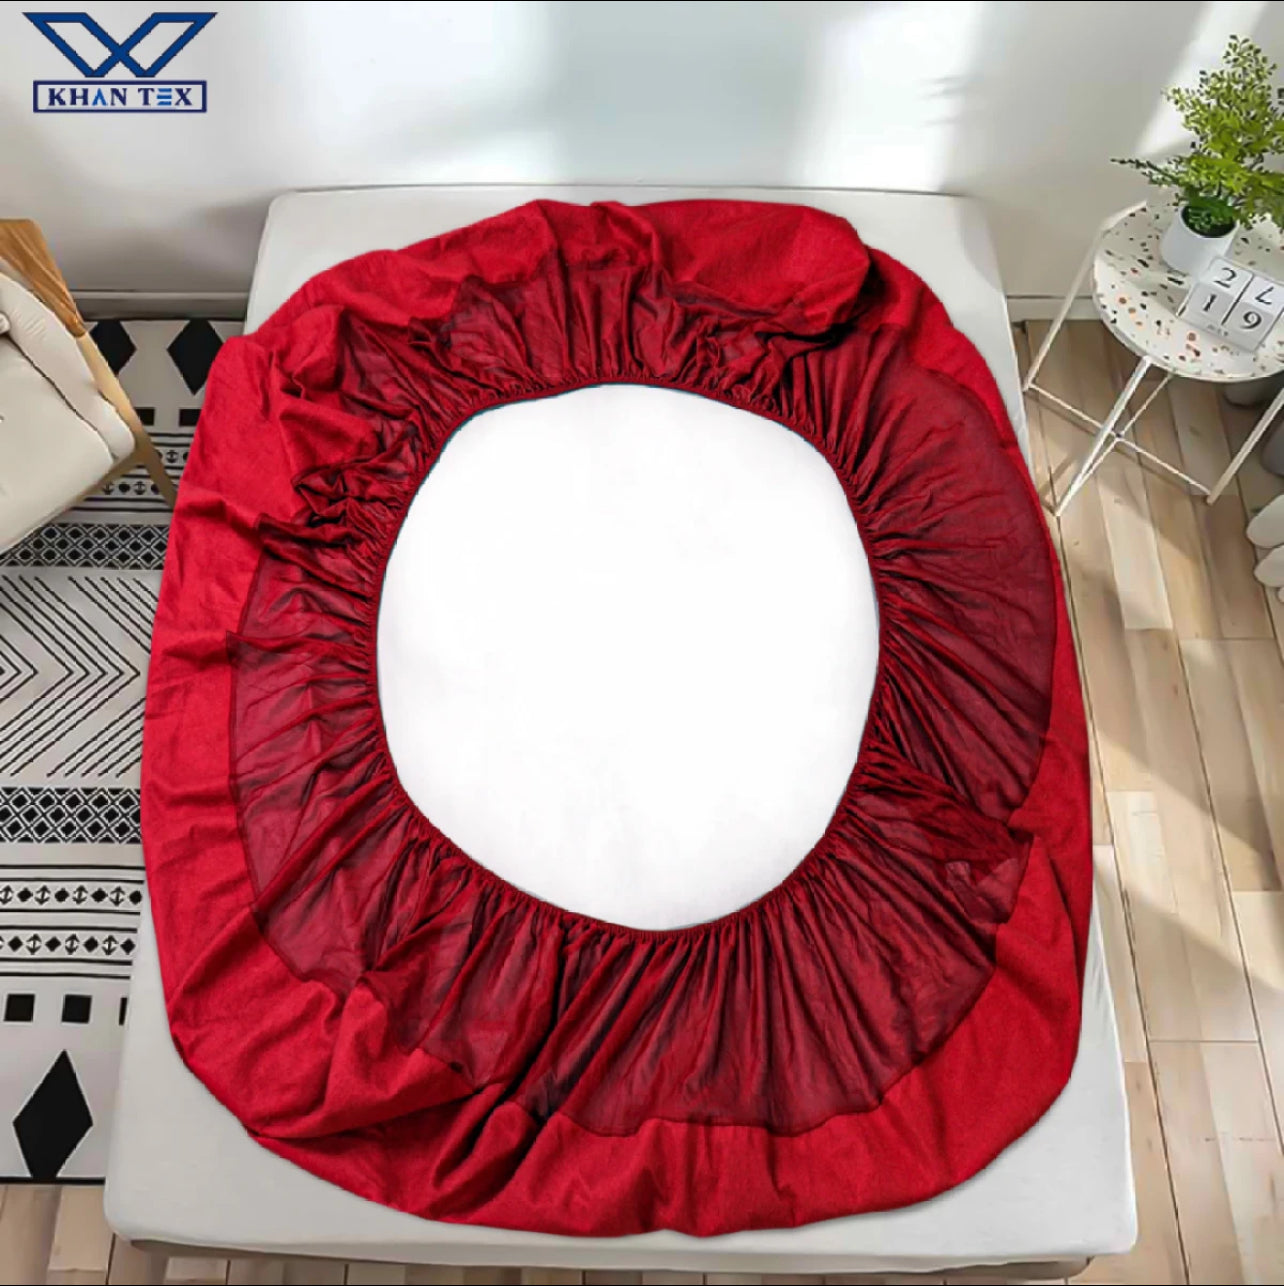 Royal Waterproof Mattress Cover For Double Bed King Size